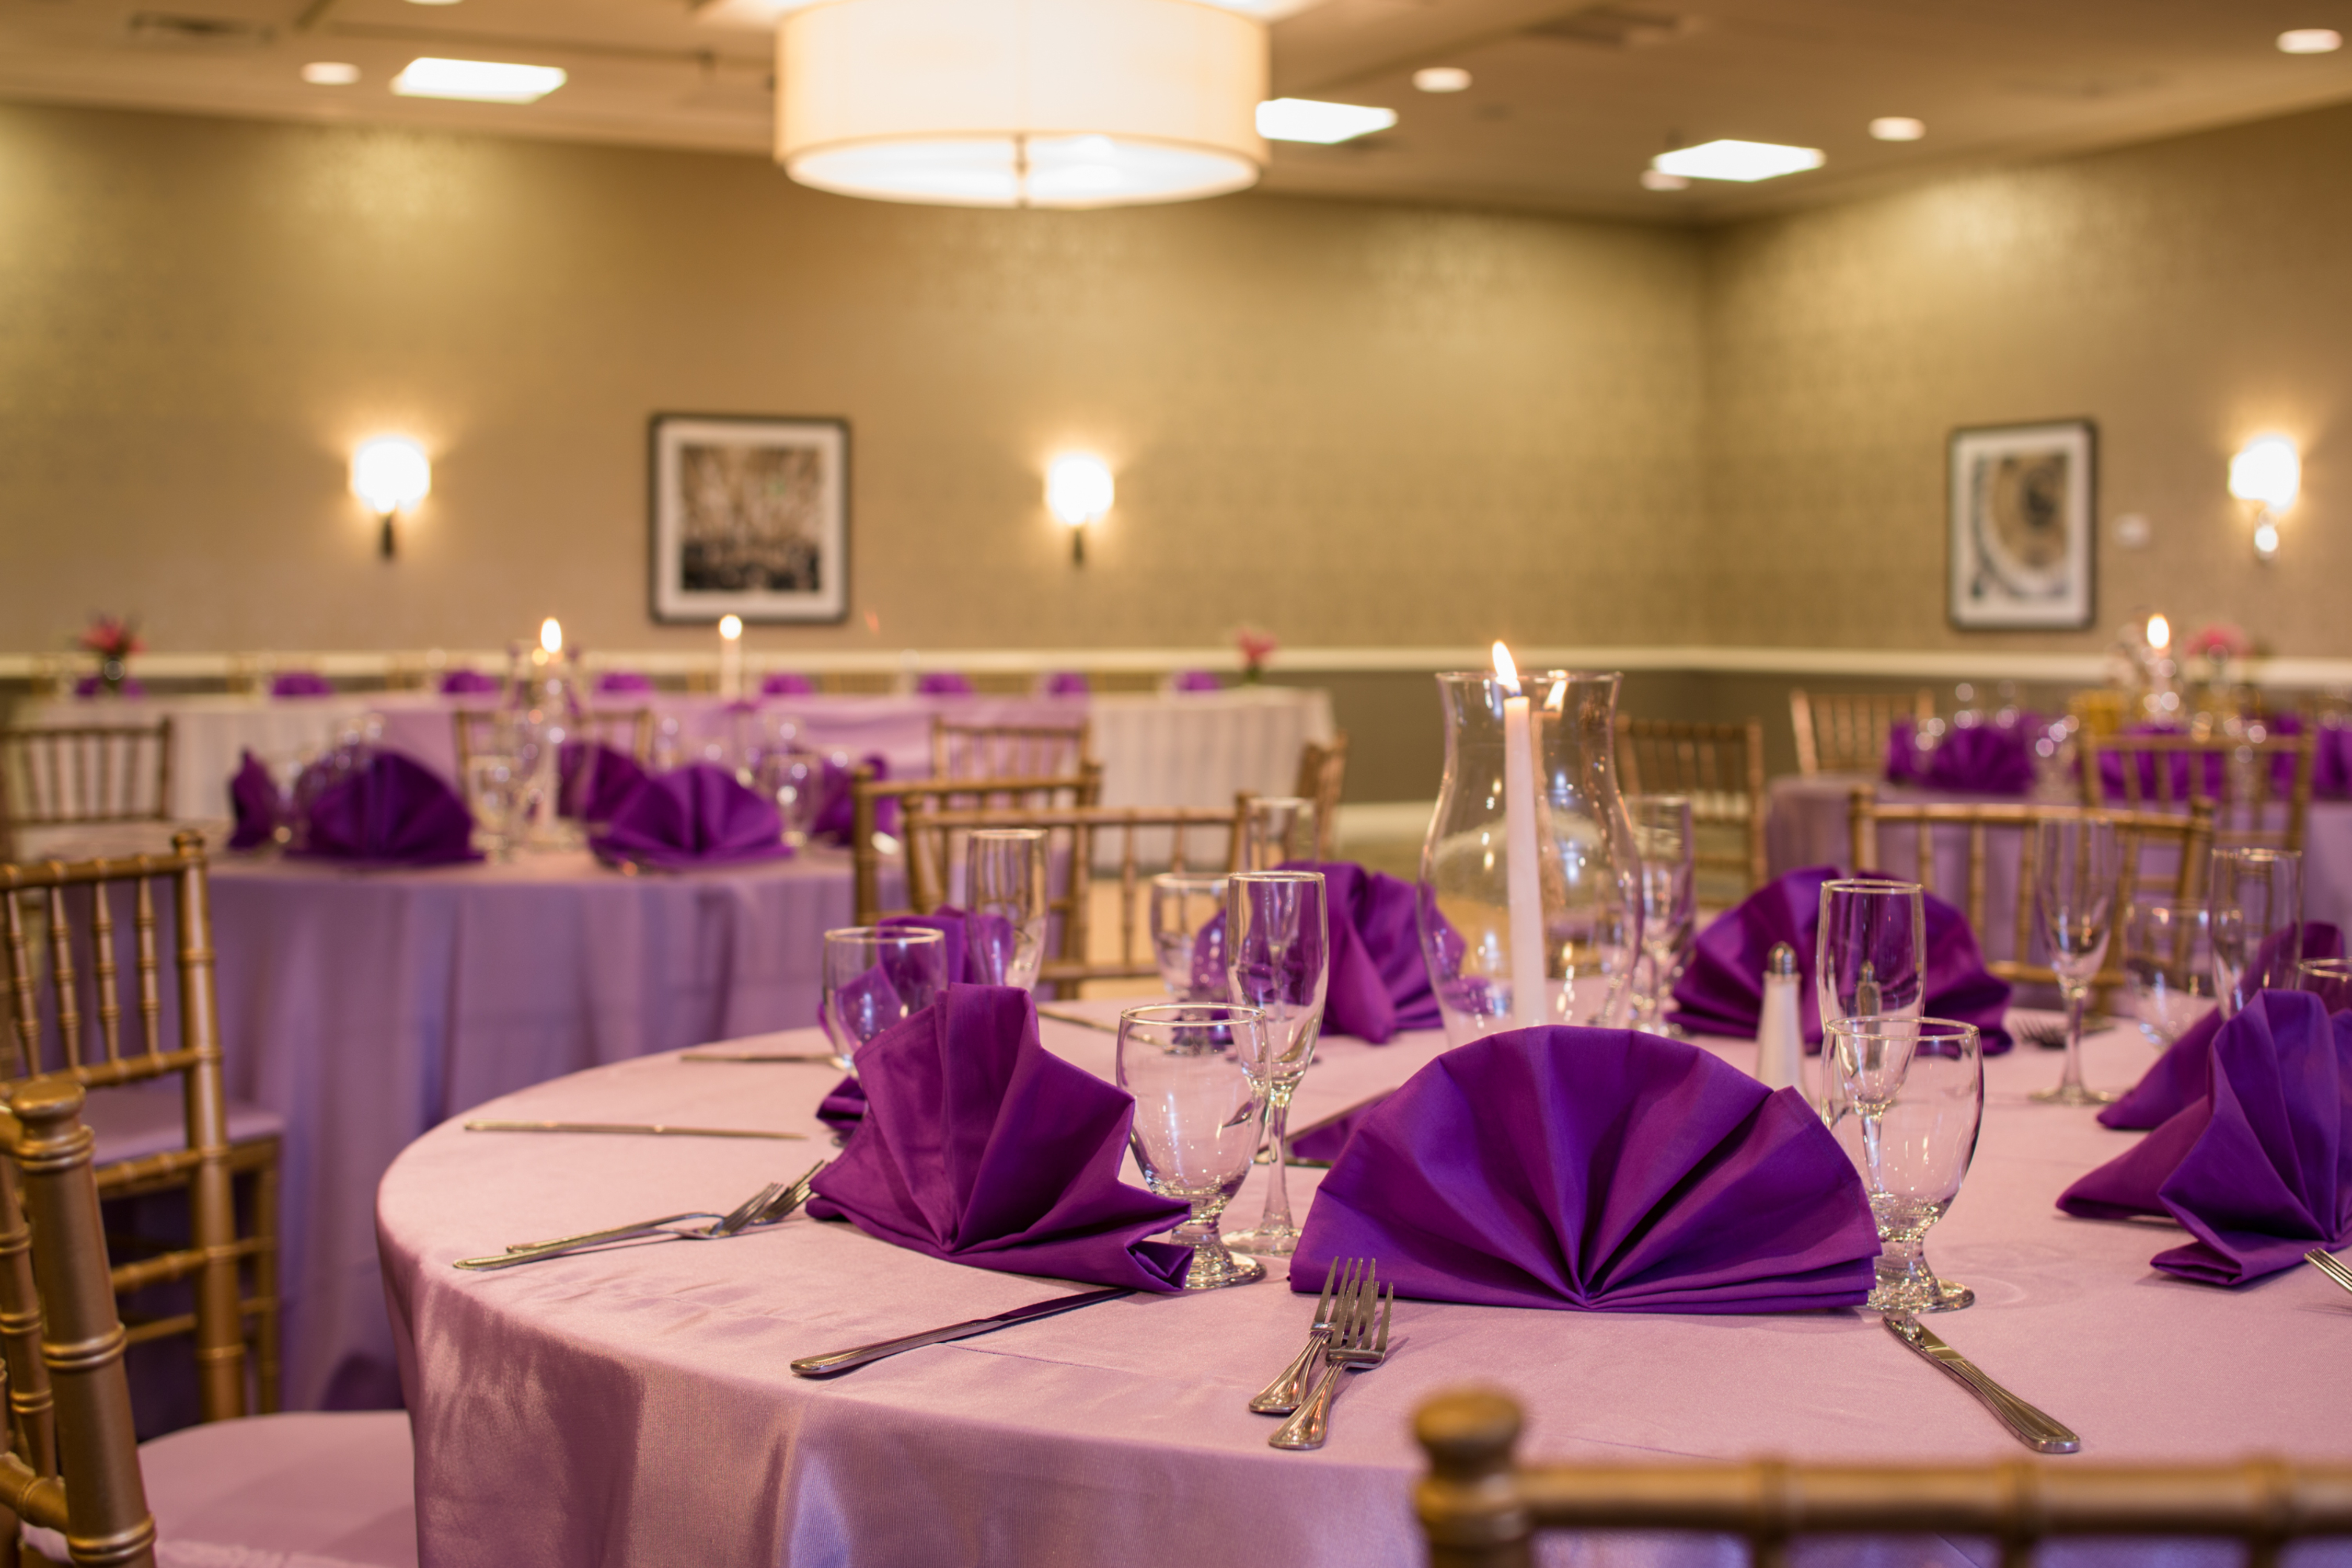 Place Settings, Purple Napkins, and Candles on Round Tables With White Linens Set Up for a Wedding